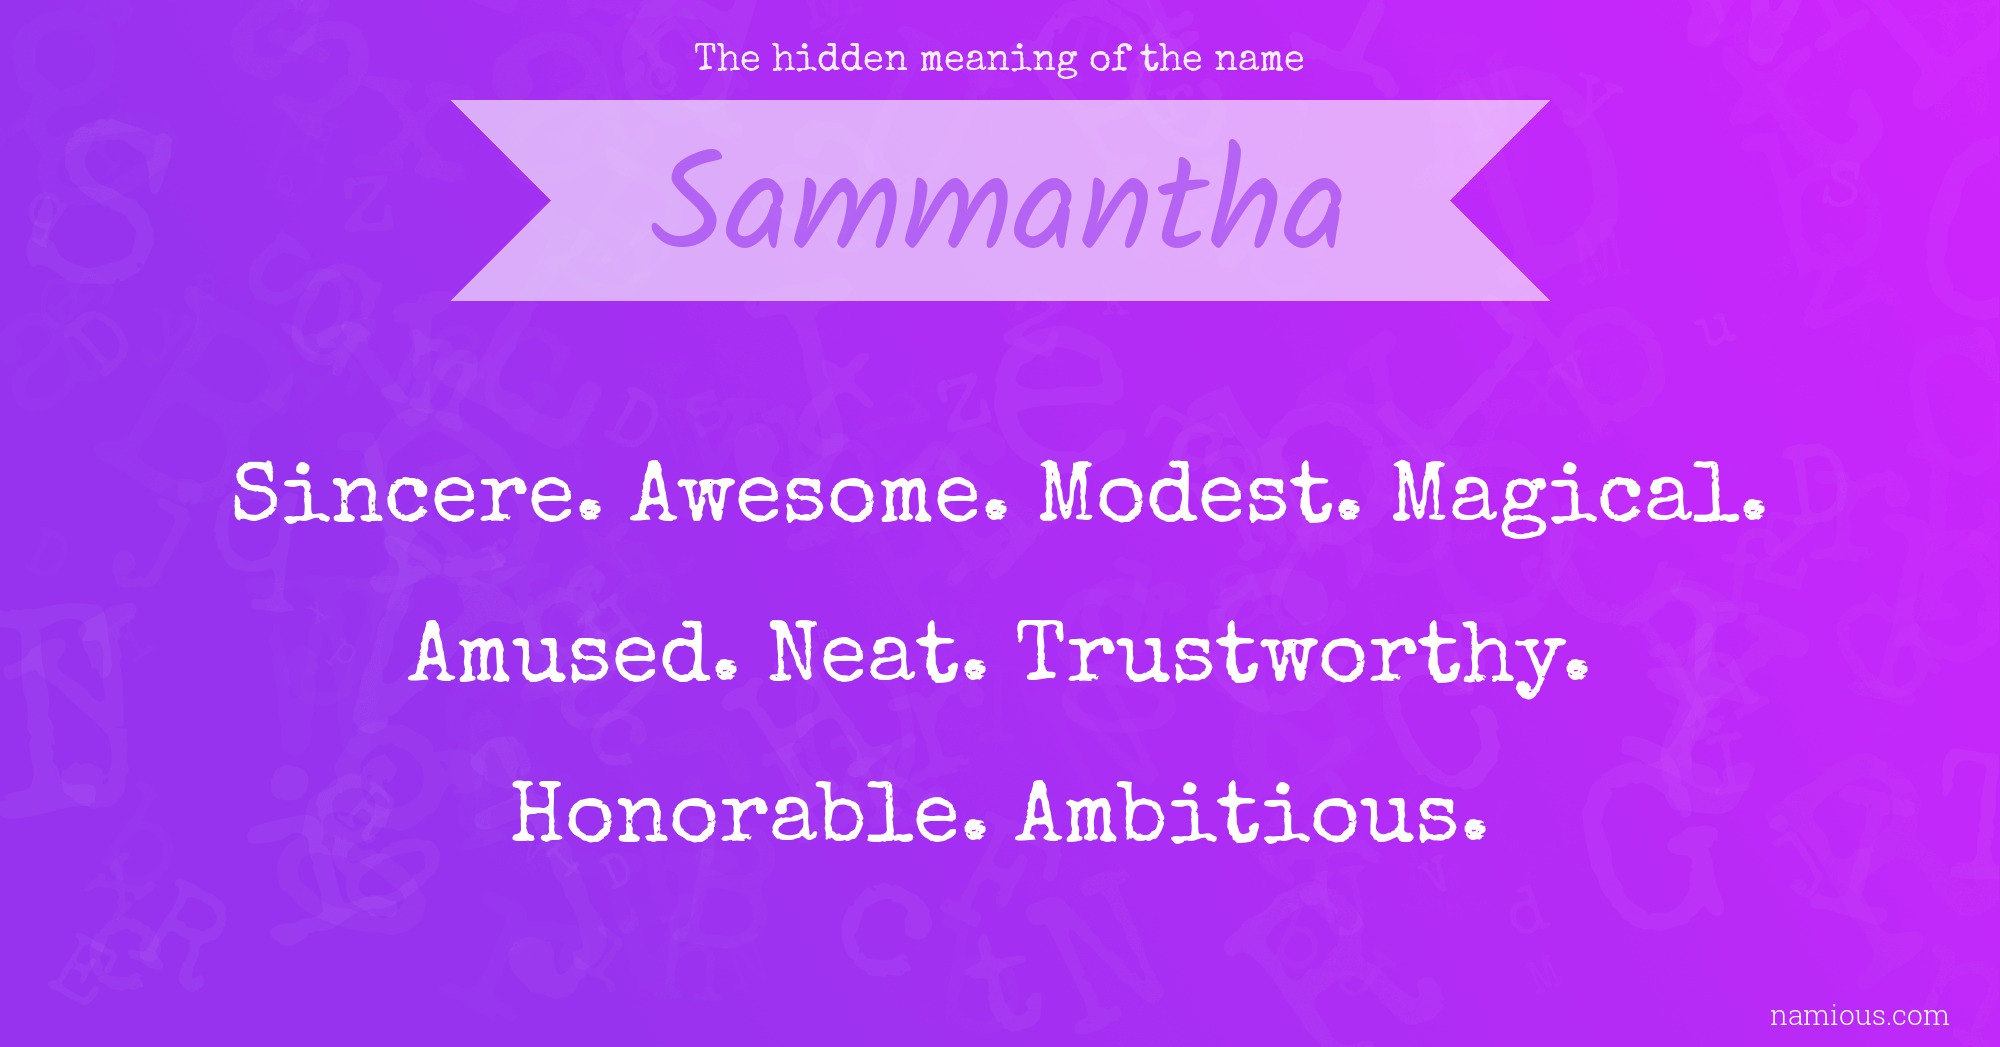 The hidden meaning of the name Sammantha